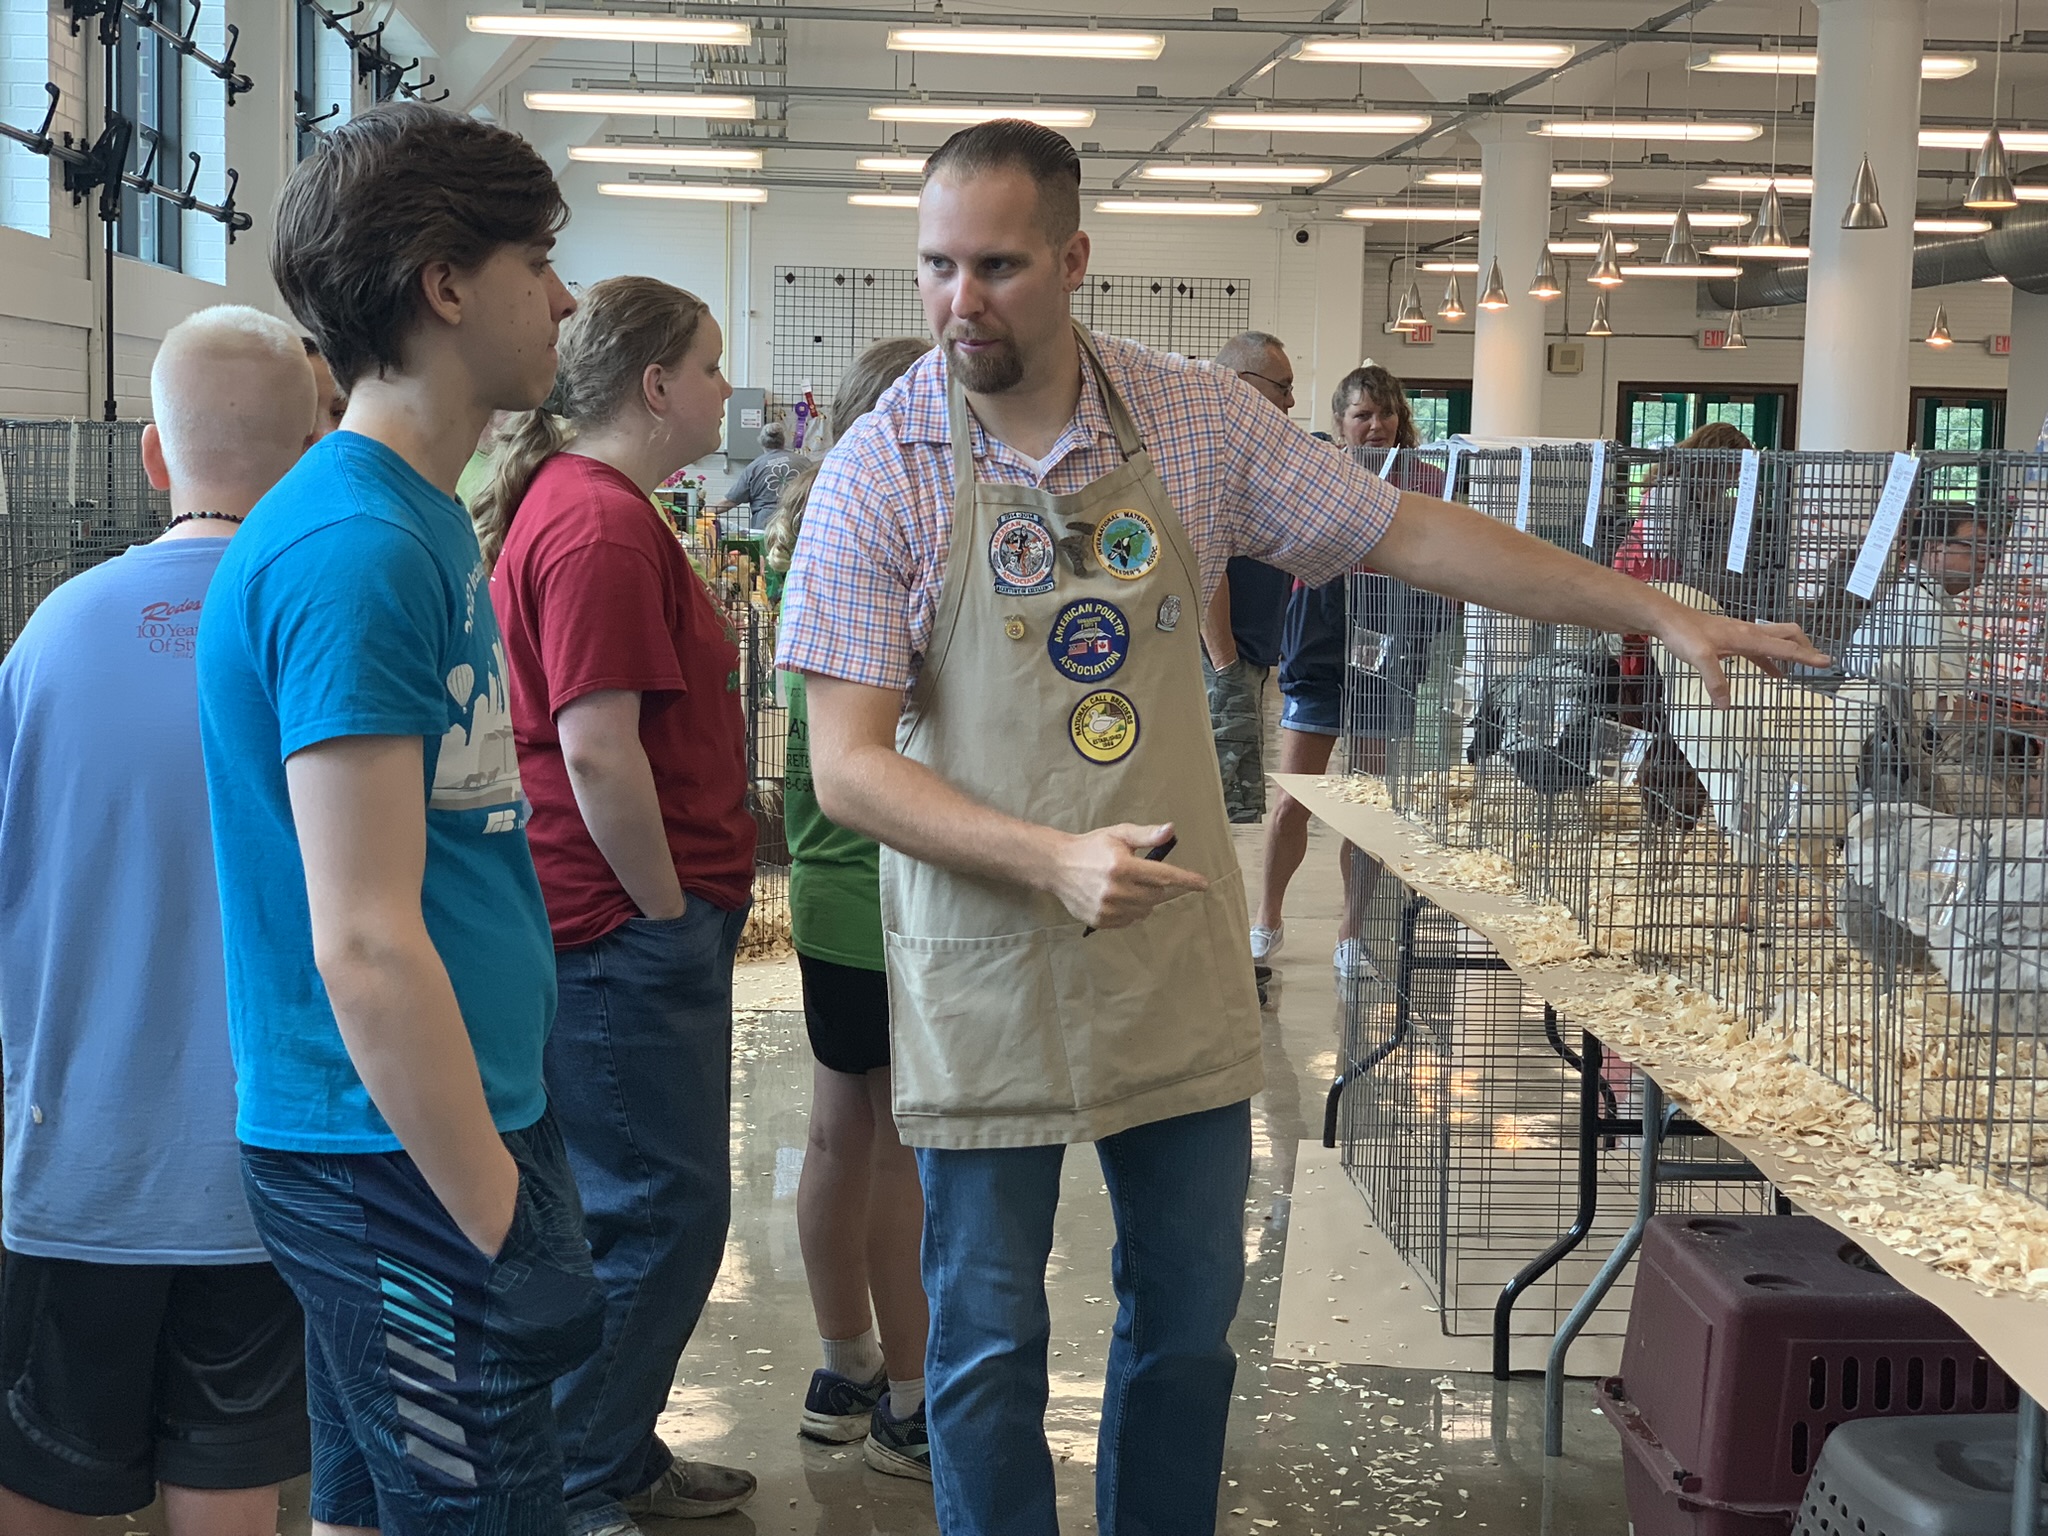 poultry judging and the Marion County 4-H Showcase